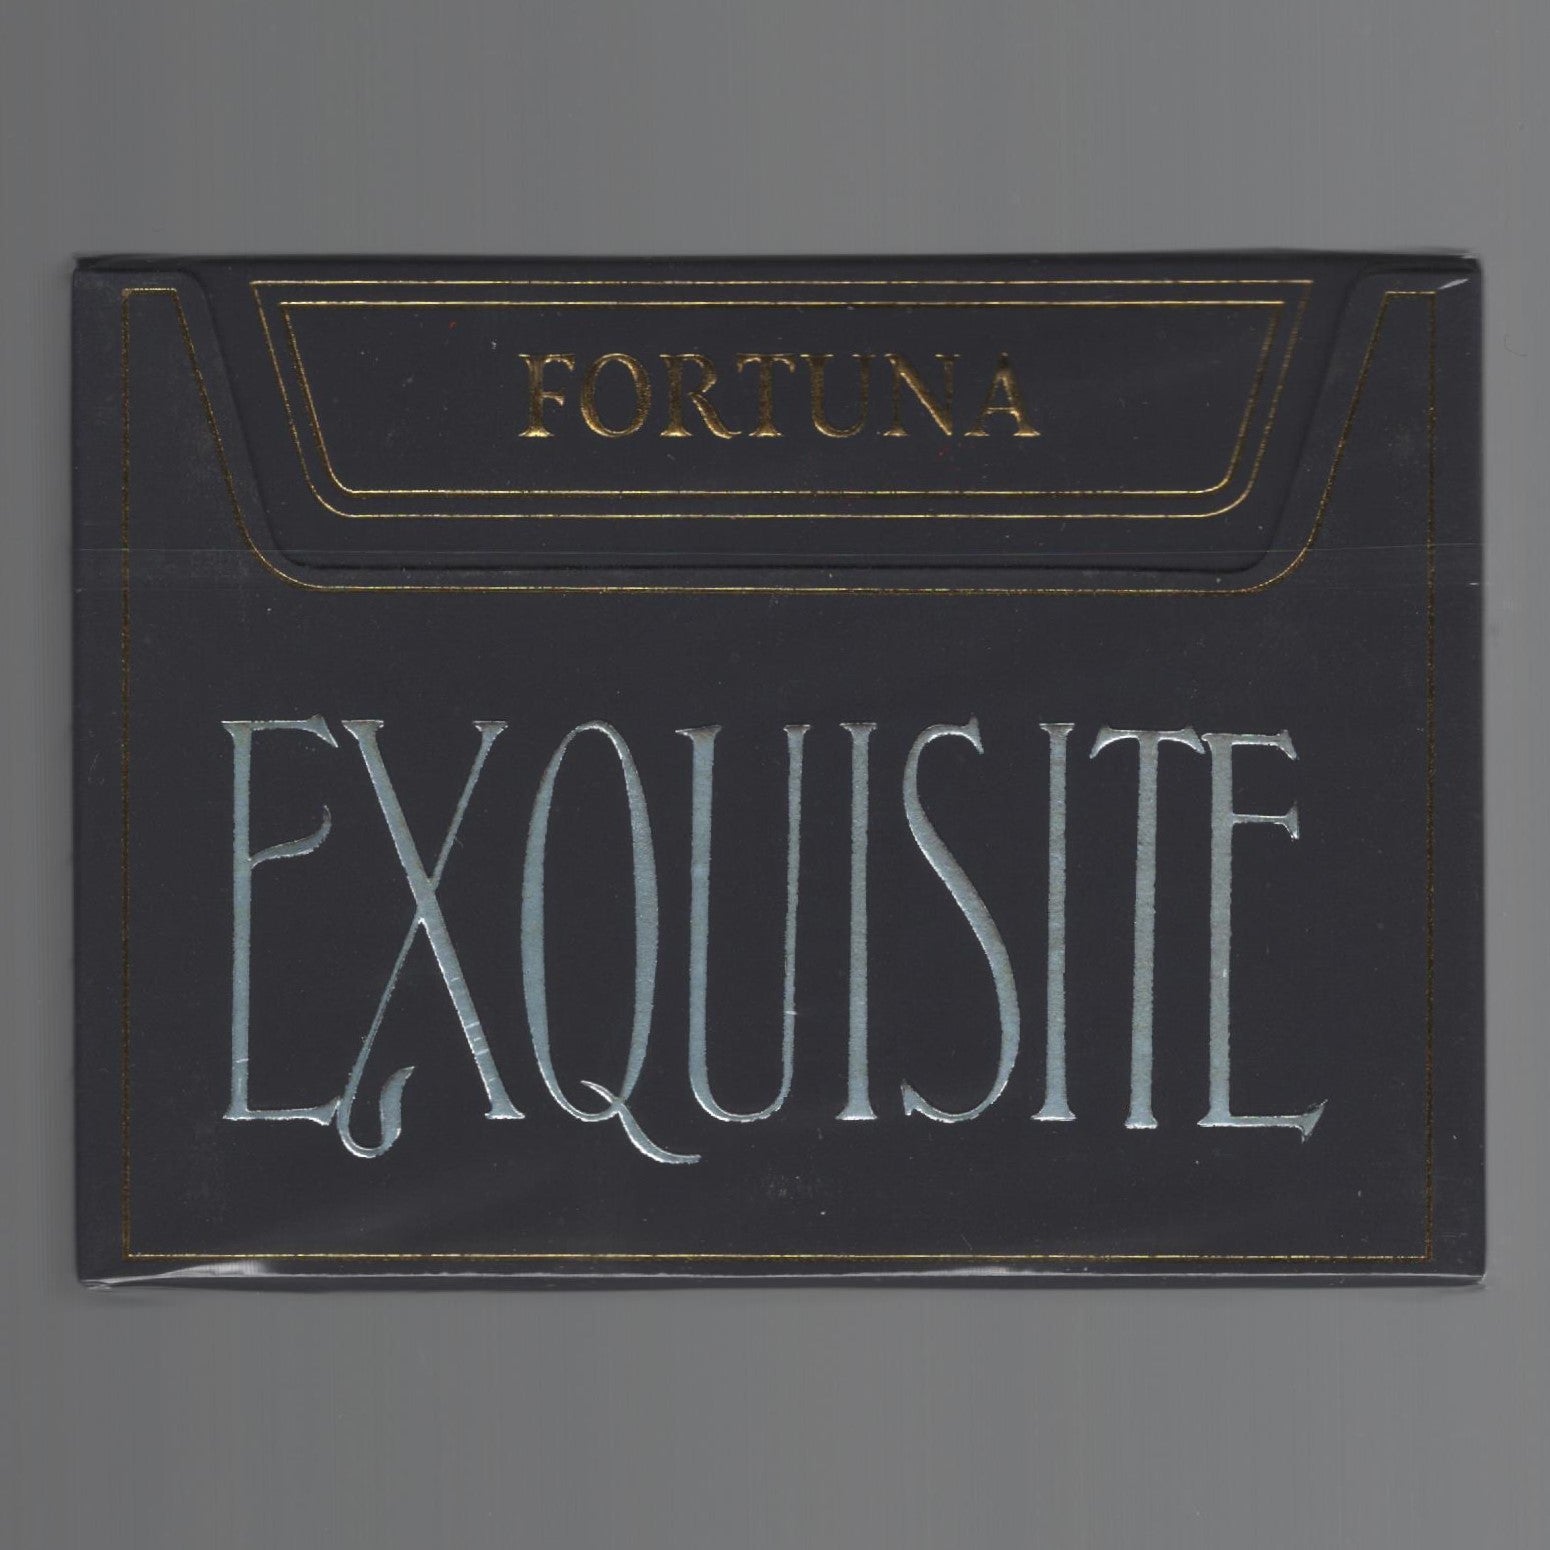 Fortuna Exquisite [AUCTION - 2 Winners]